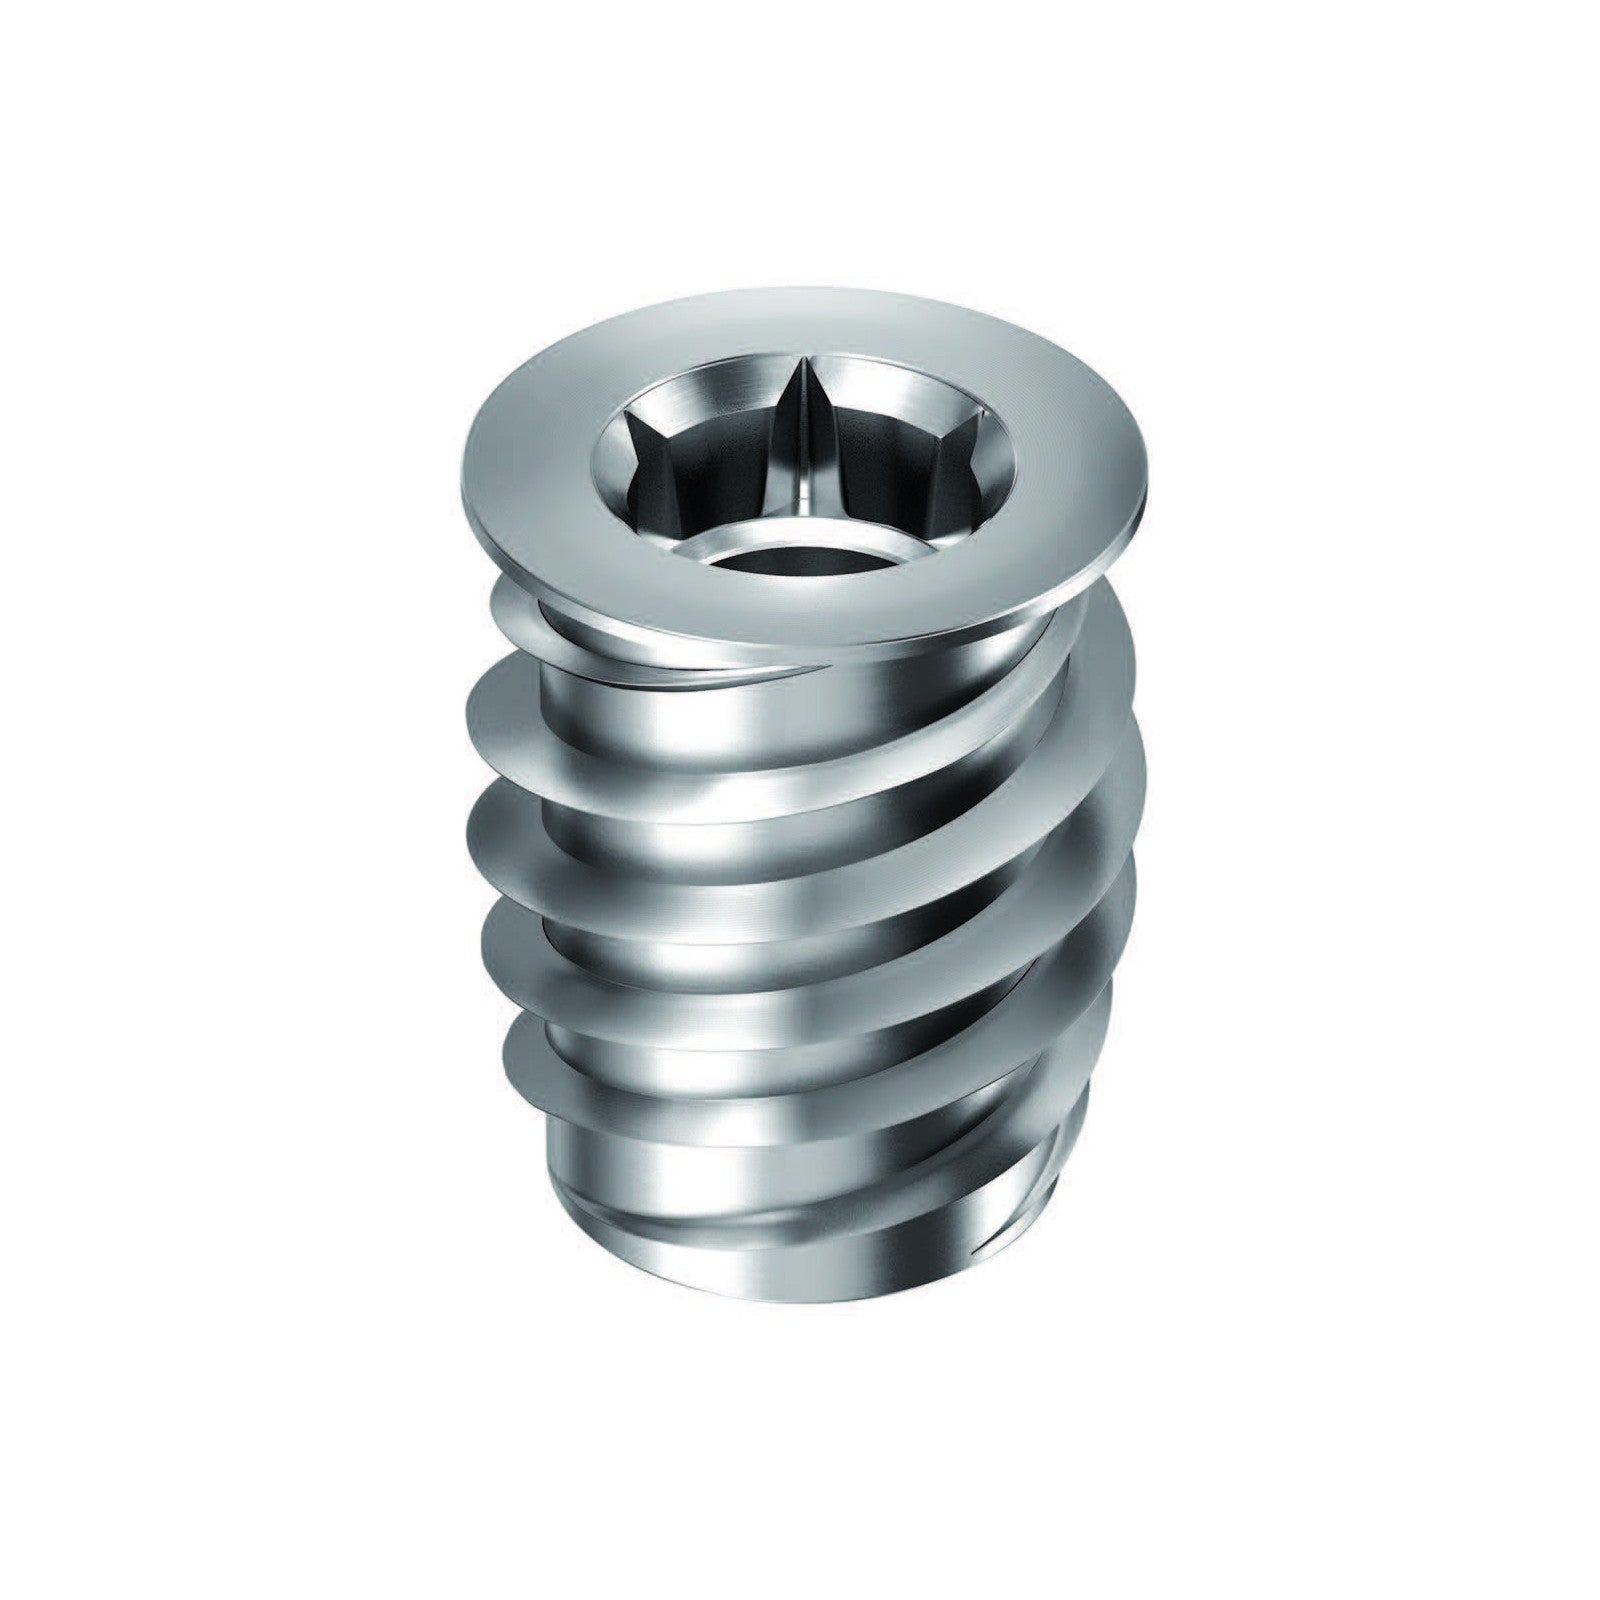 M8 Threaded Insert for Timber Fitting - The Wholesale Glass Company